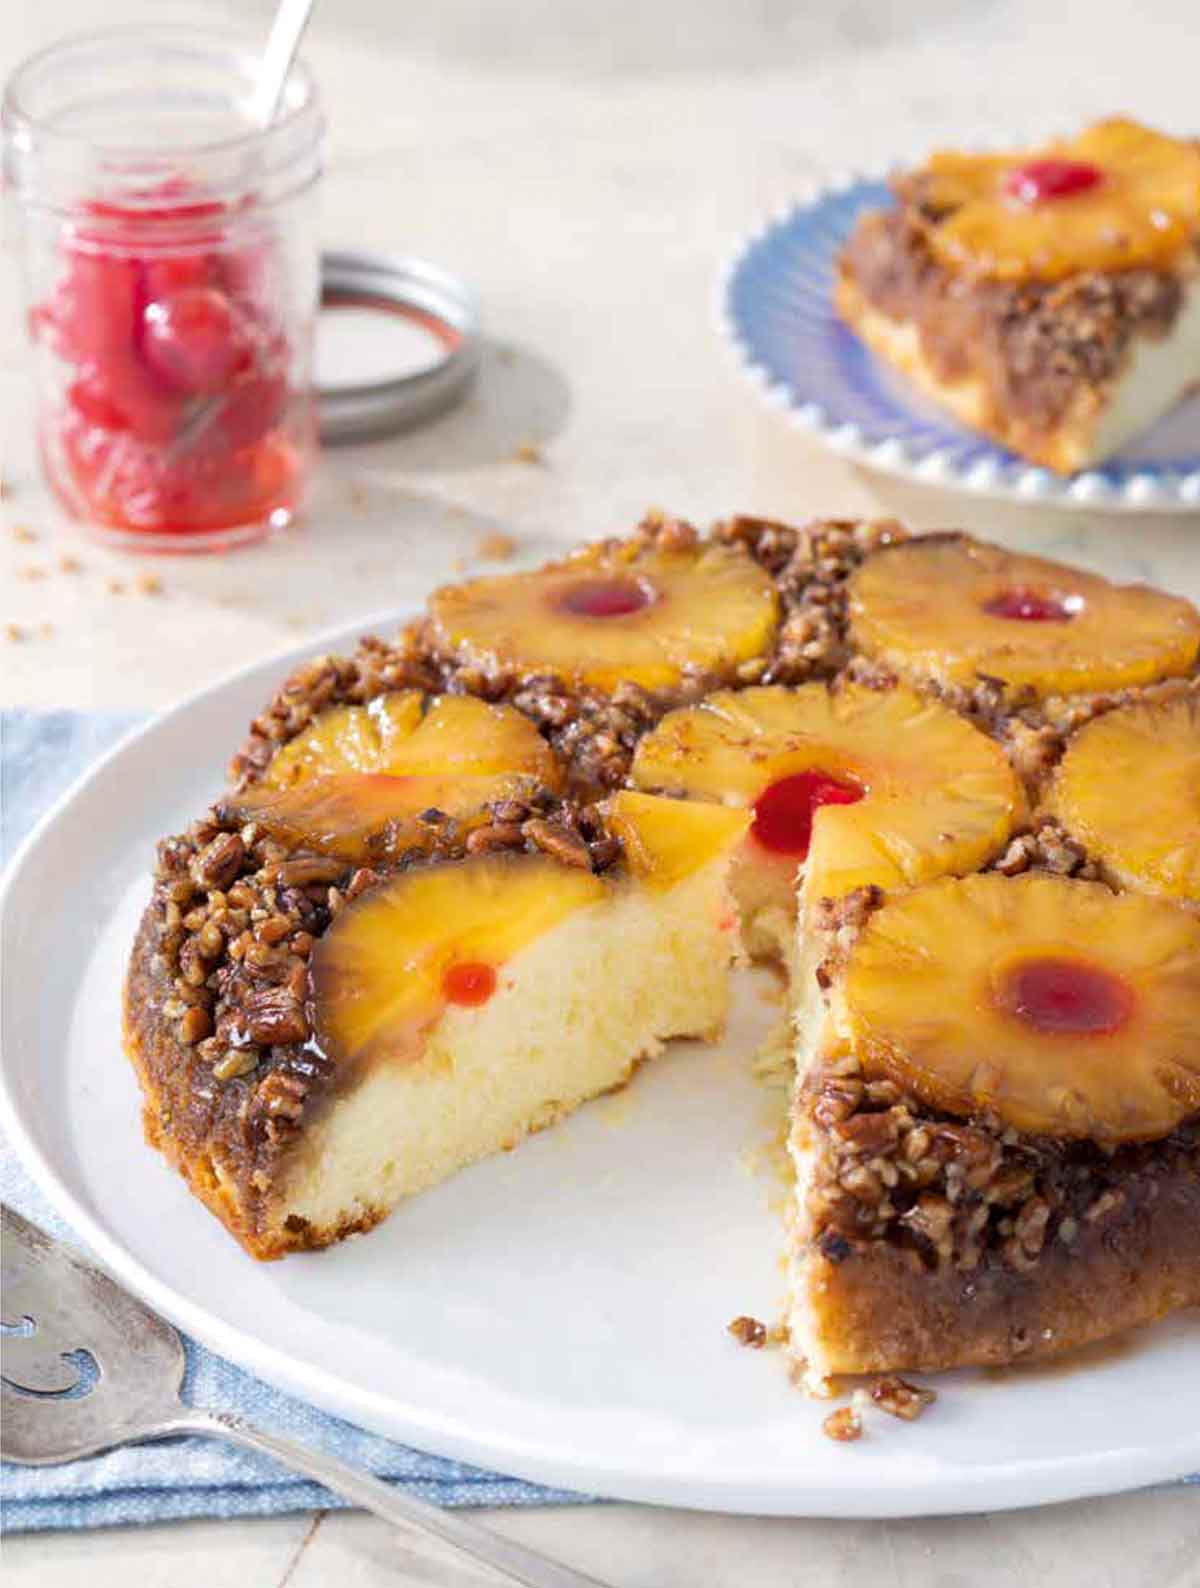 A pineapple upside-down cake on a white plate with a slice taken out